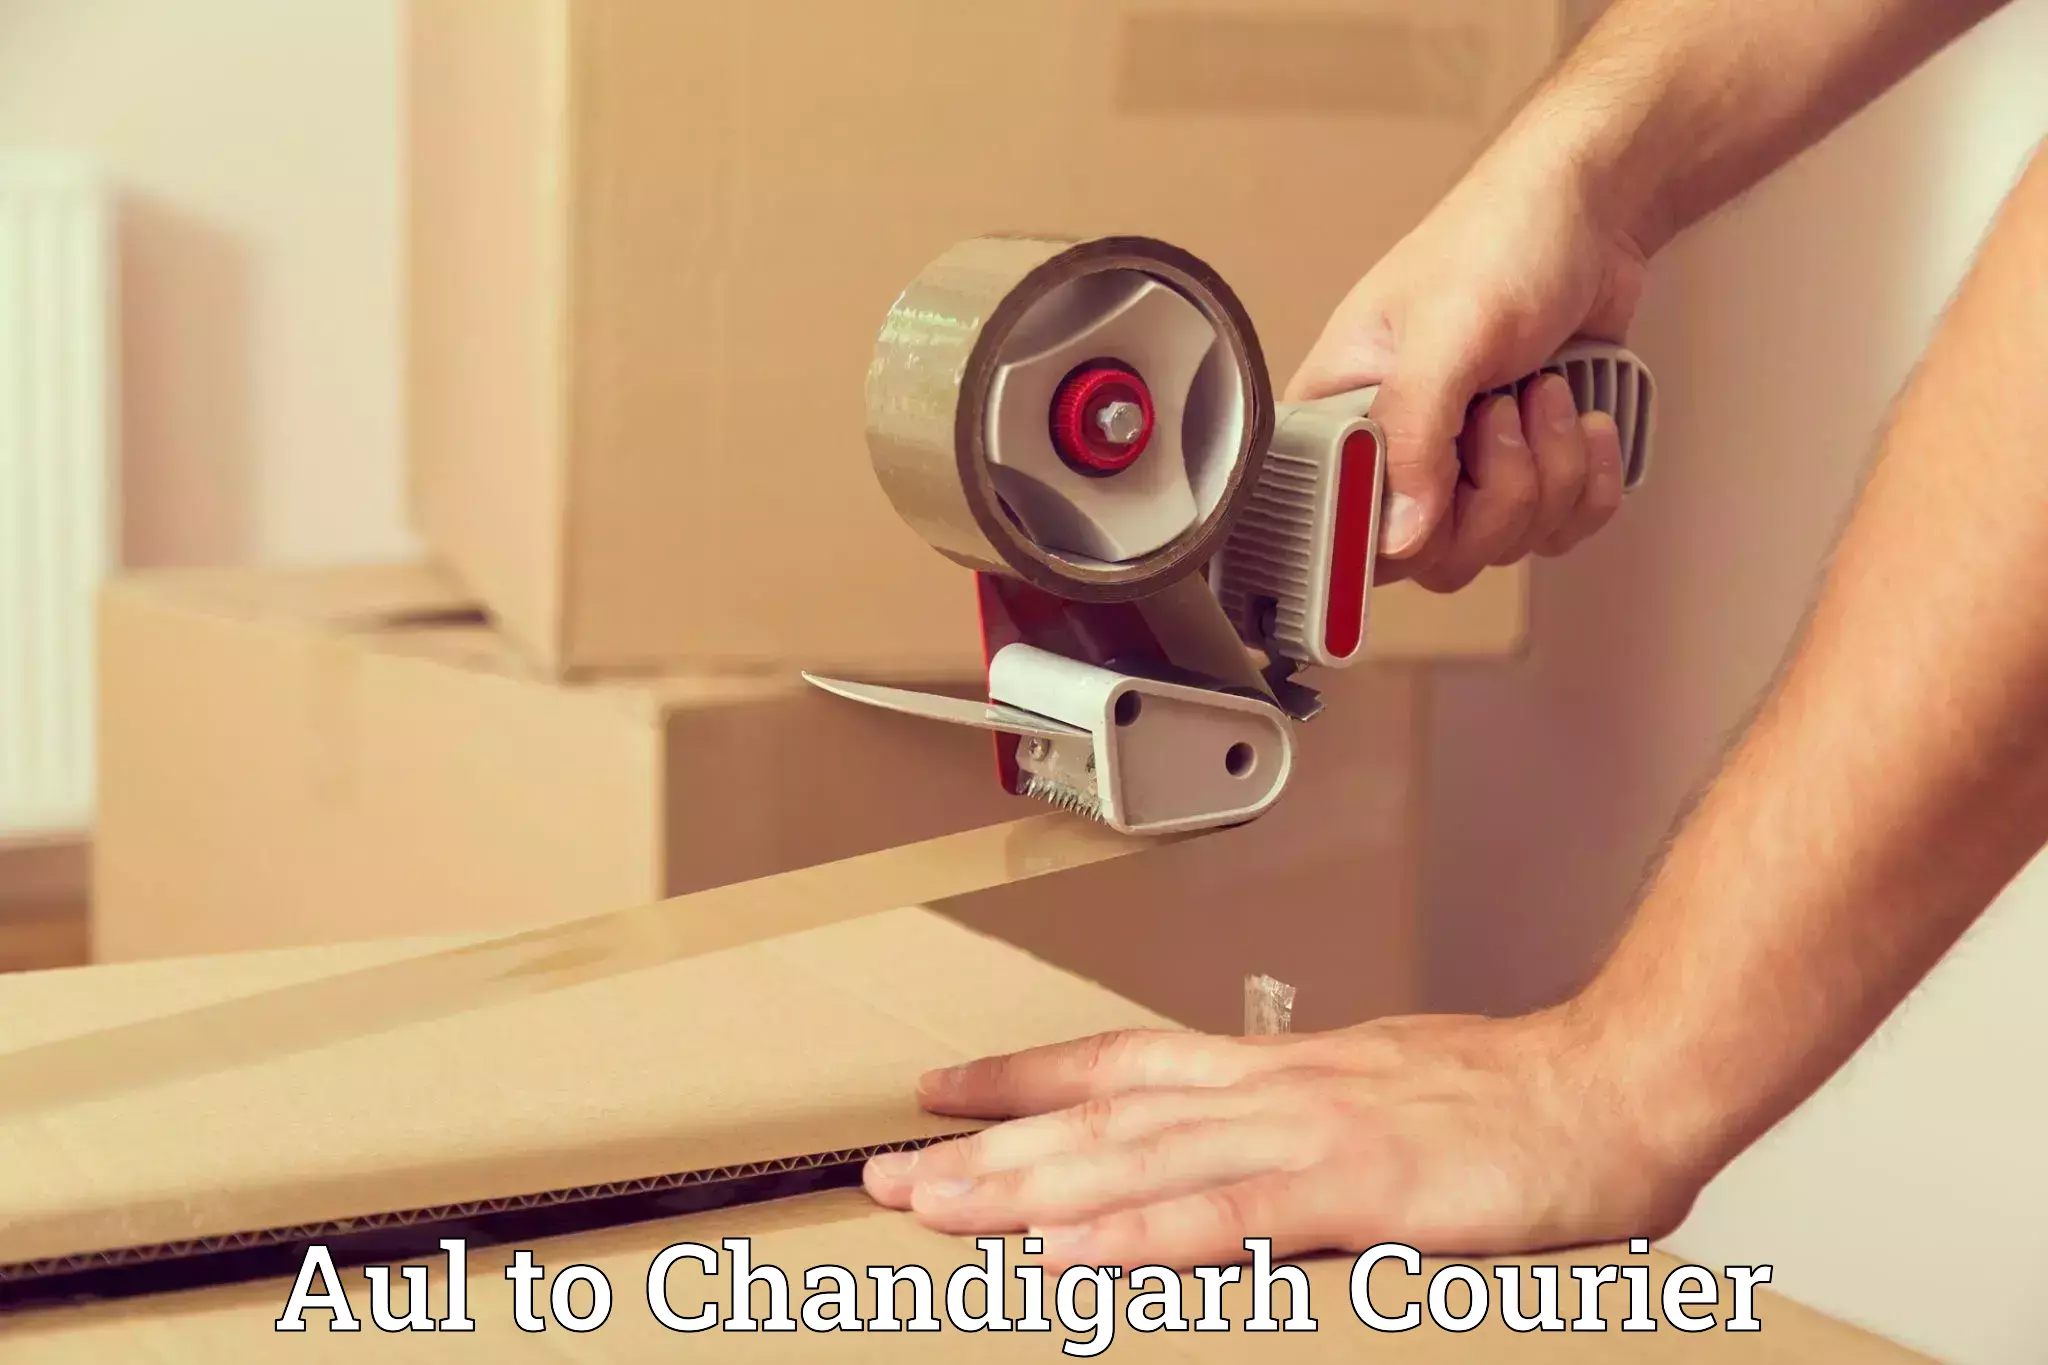 Furniture transport experts Aul to Chandigarh